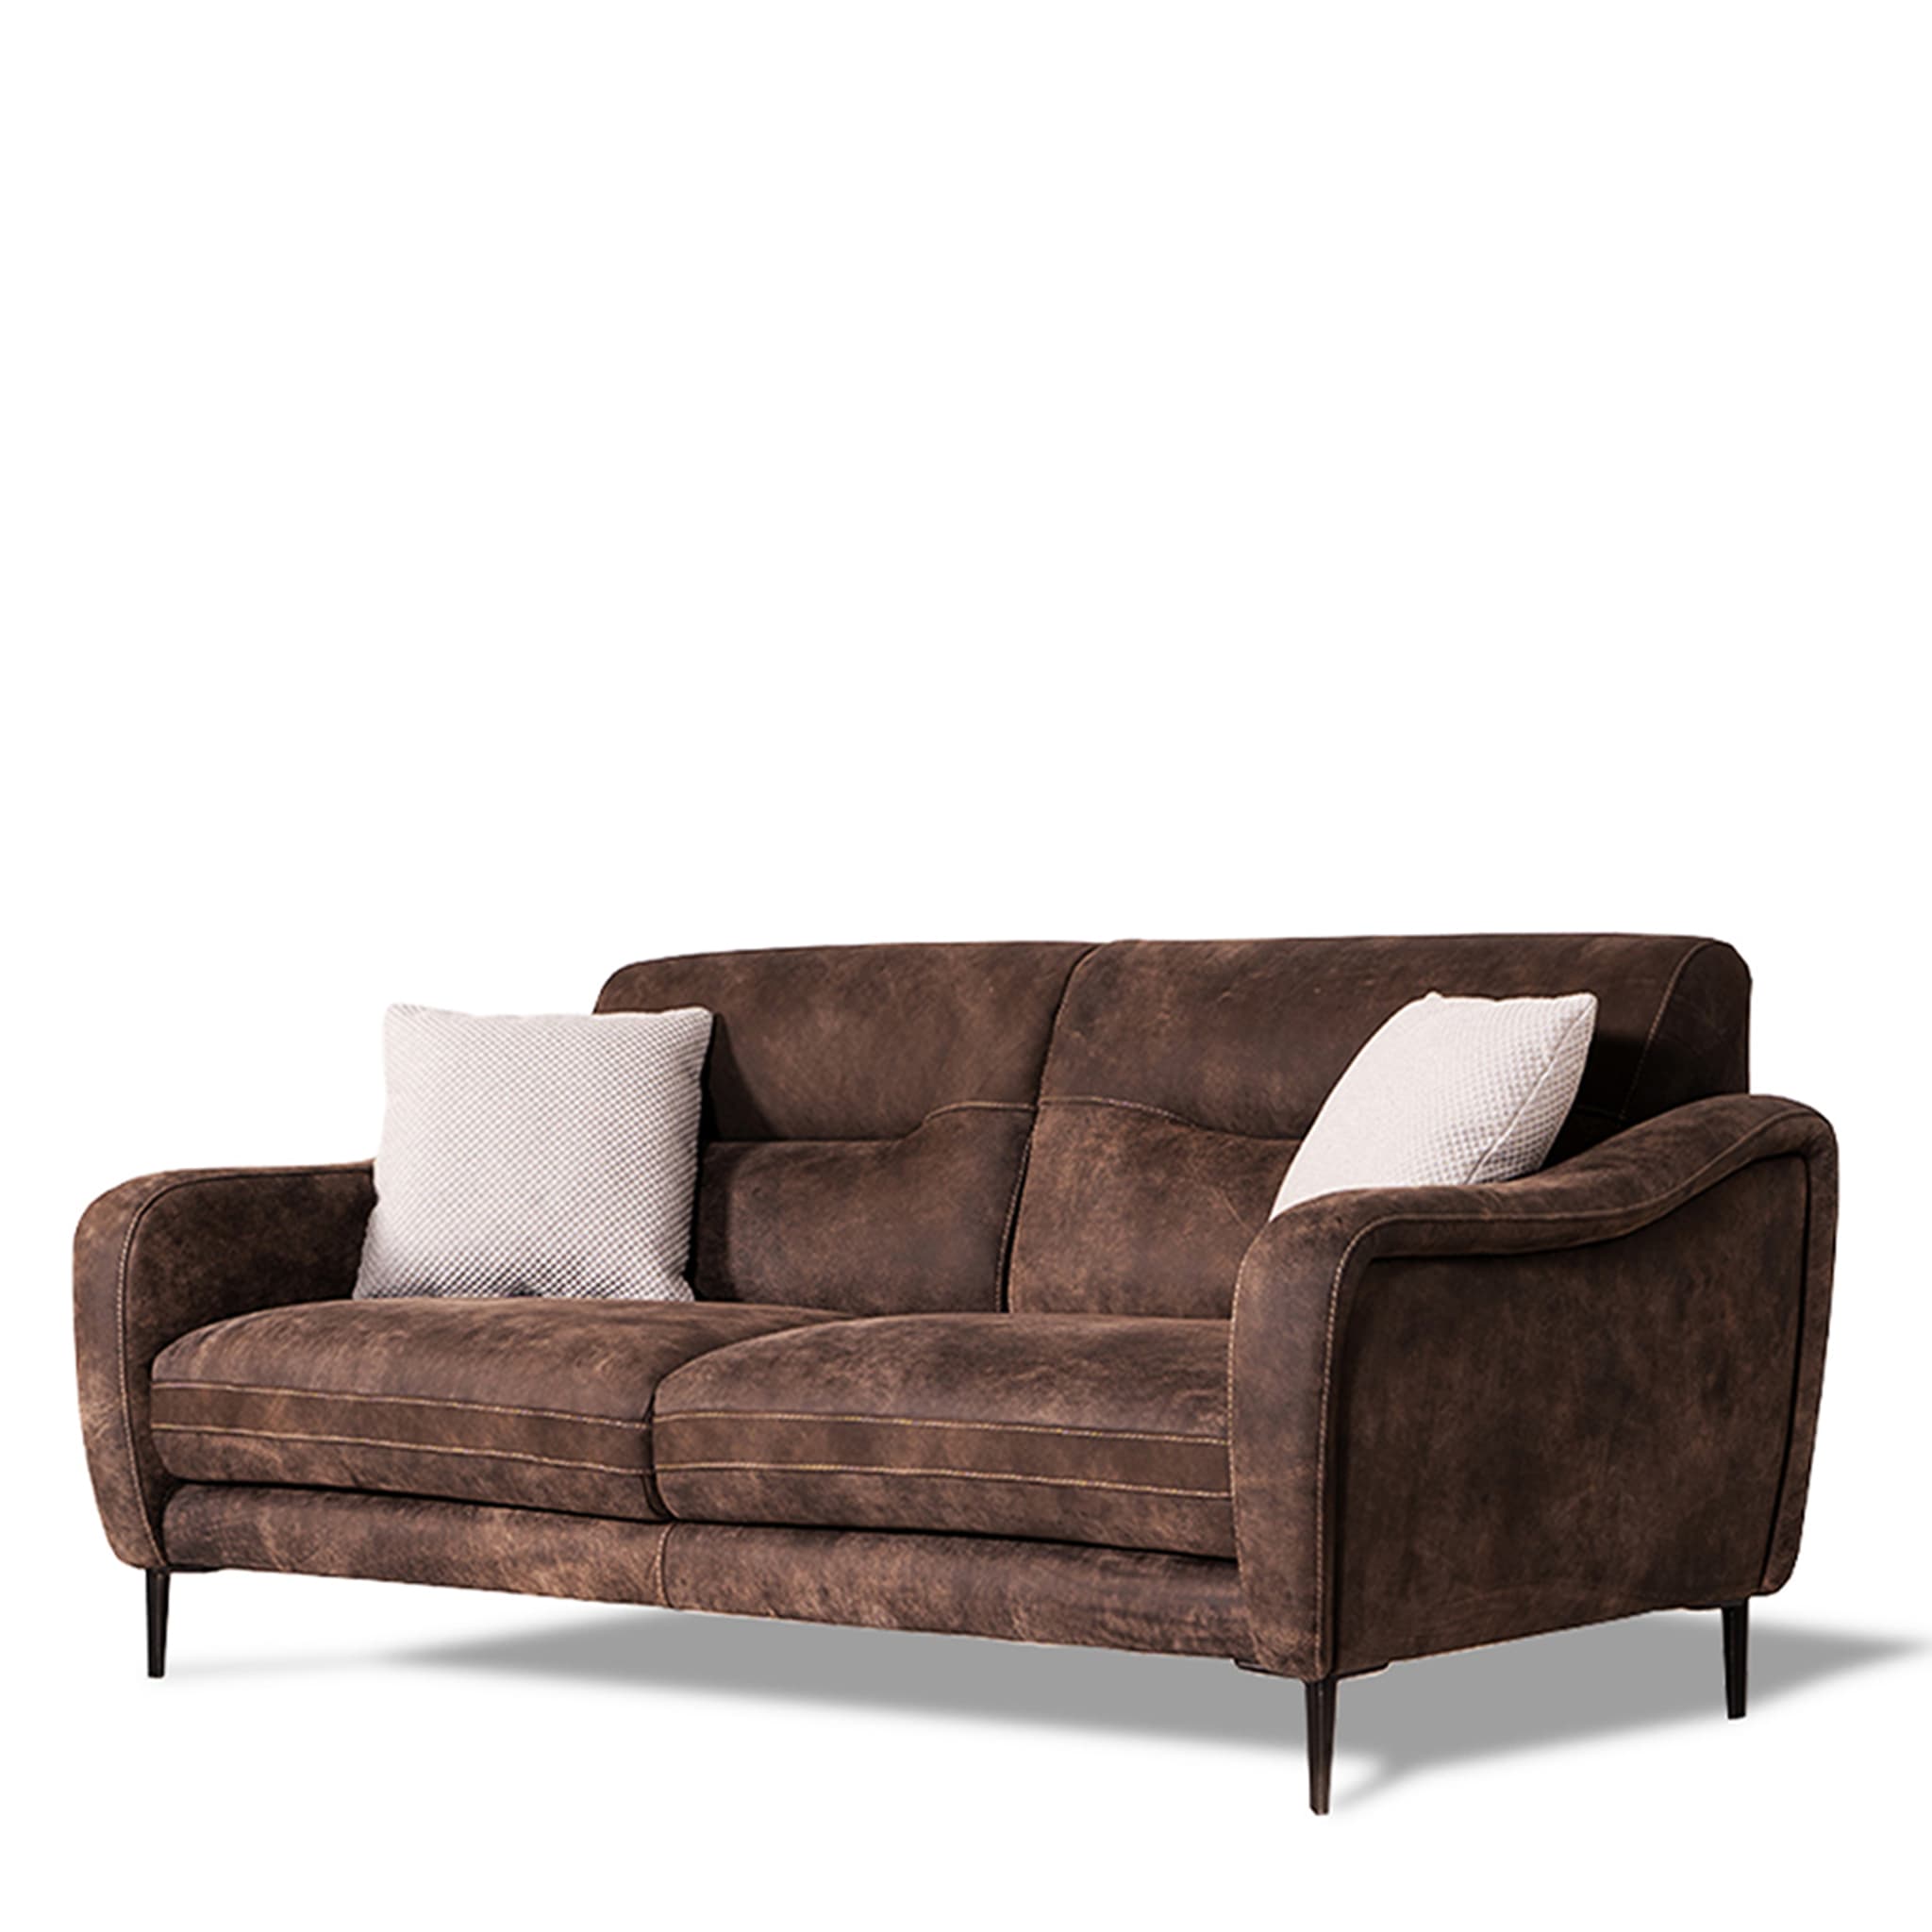 Fonzie Brown Leather 2-Seater Sofa Tribeca Collection - Alternative view 4